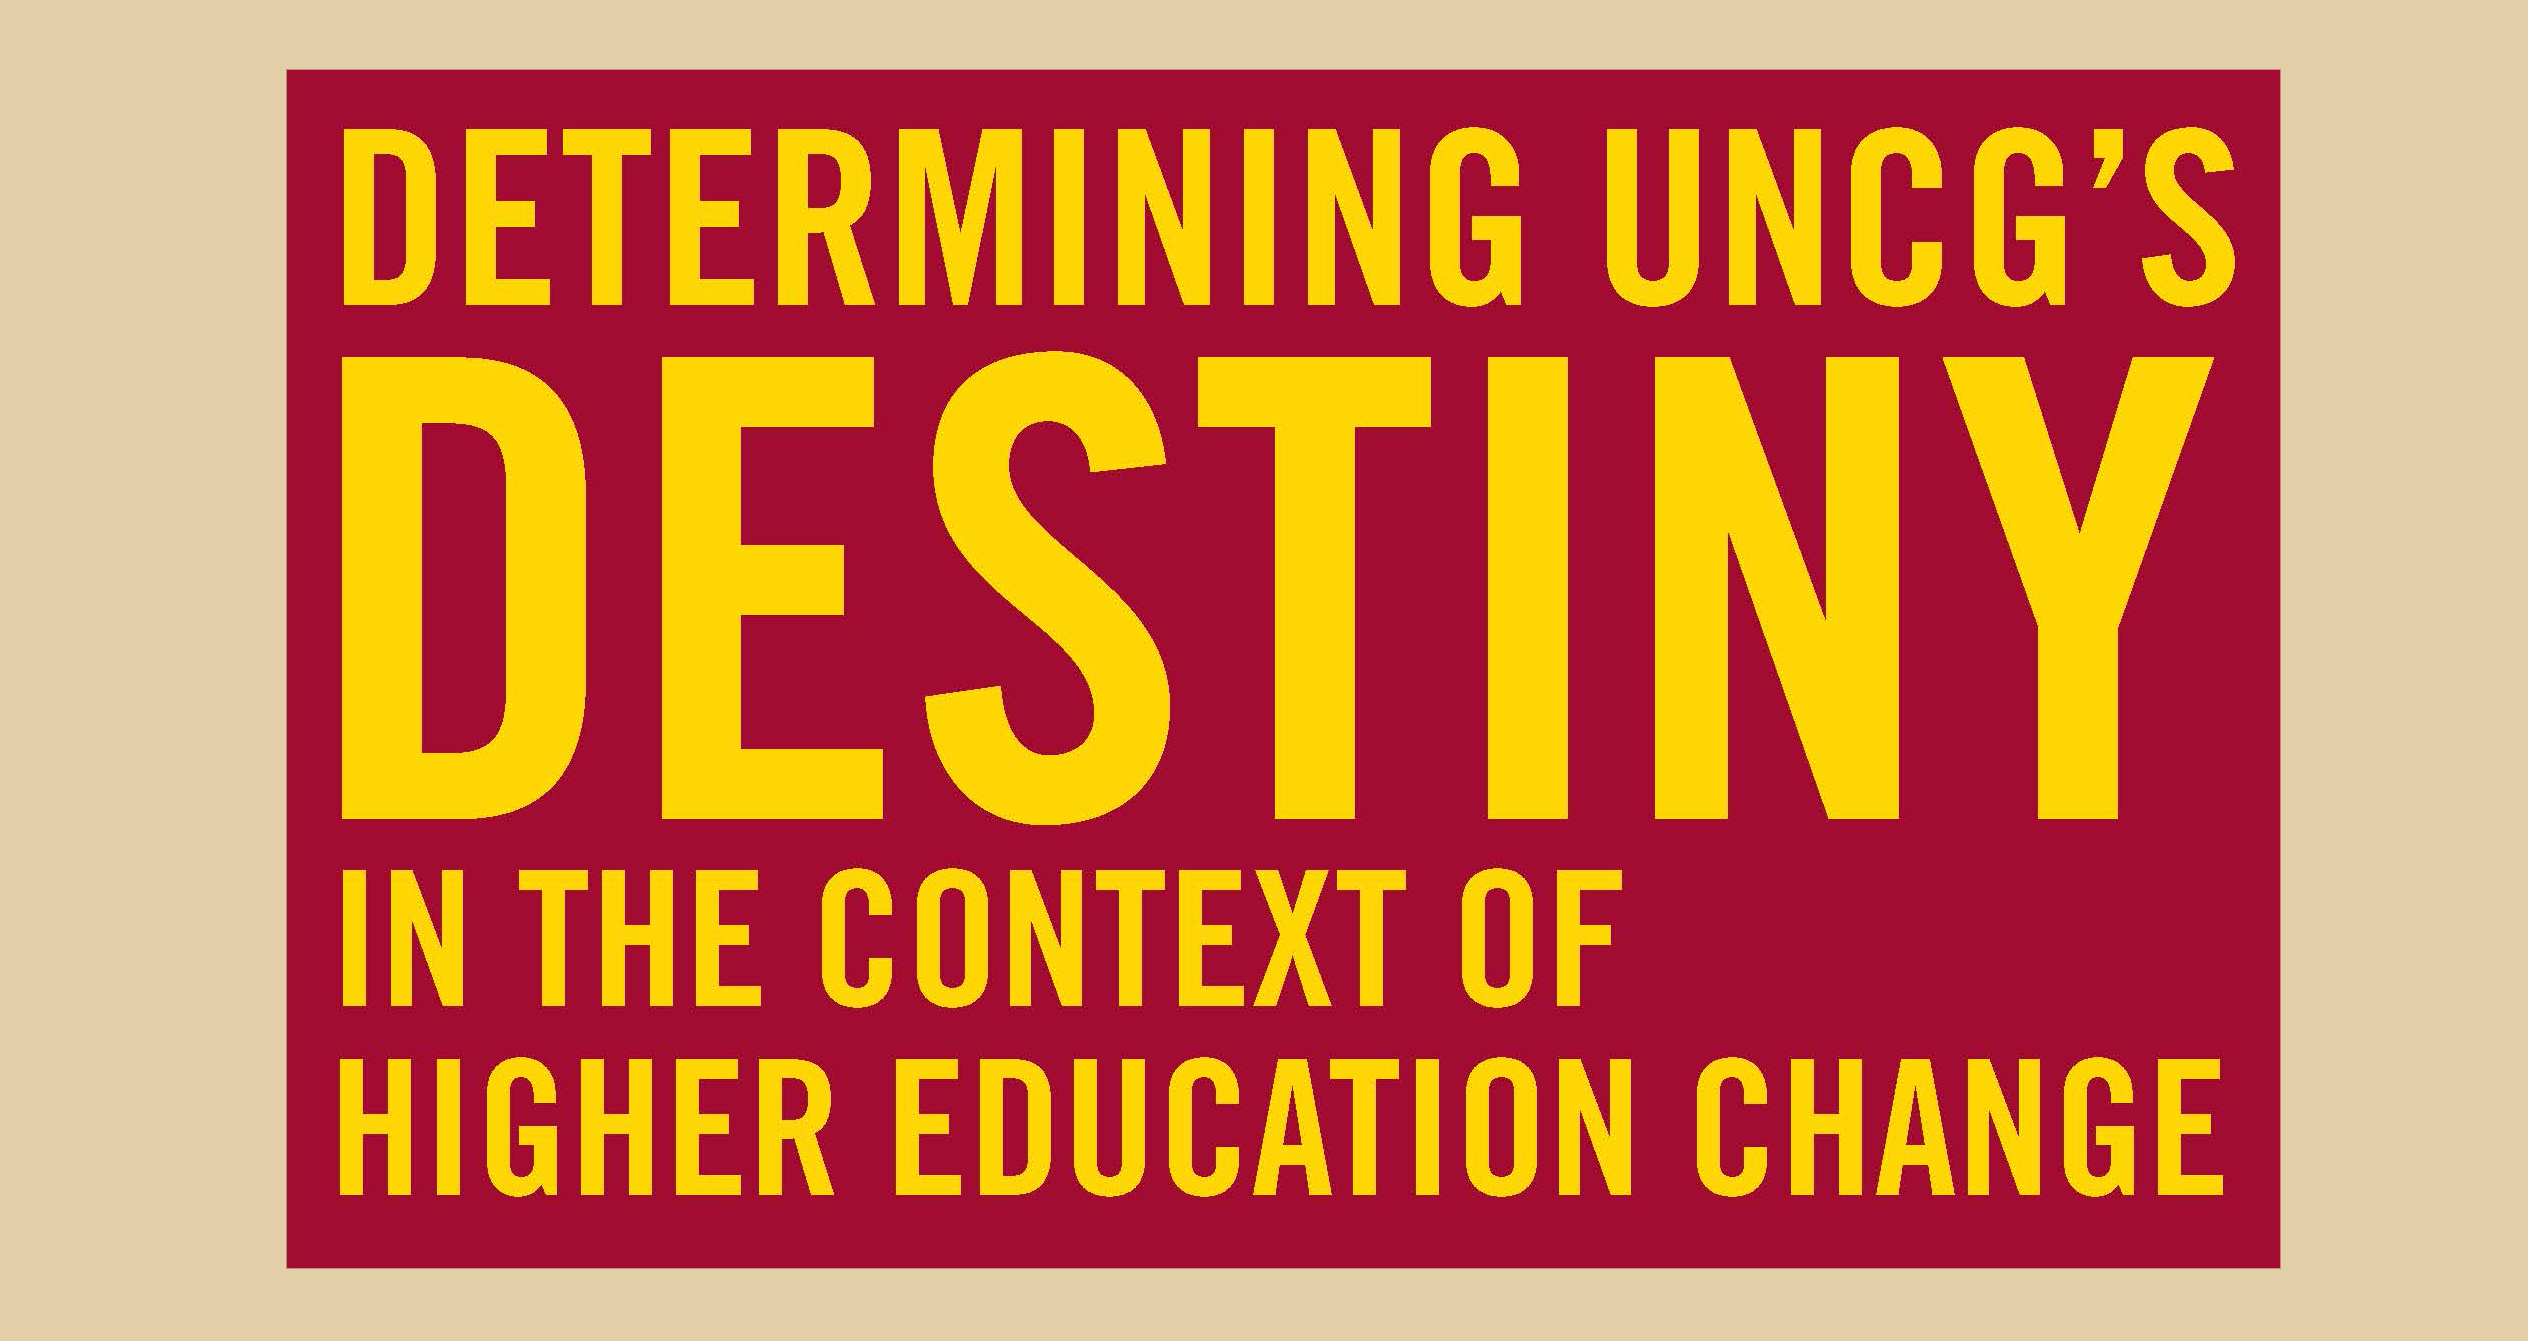 Featured Image for Determining UNCG’s Destiny in the Context of Higher Education Change